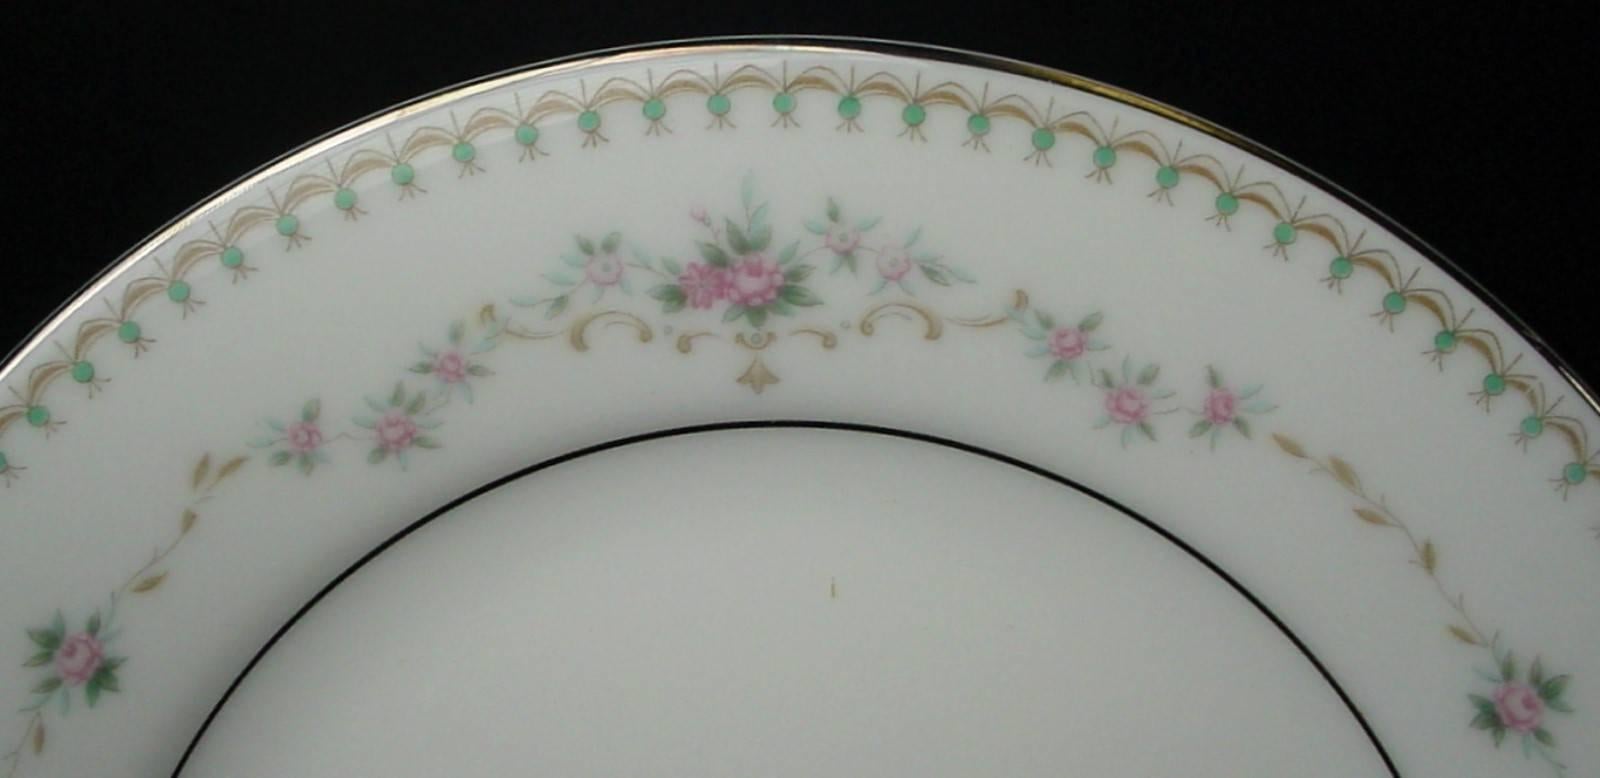 China finders.

China, crystal, flatware and collectible matching service is offering one (1). 

Noritake China Fairmount 6102 pattern 95-piece set service for twelve (12)

in great condition free from chips, cracks, break or stain.

Pink